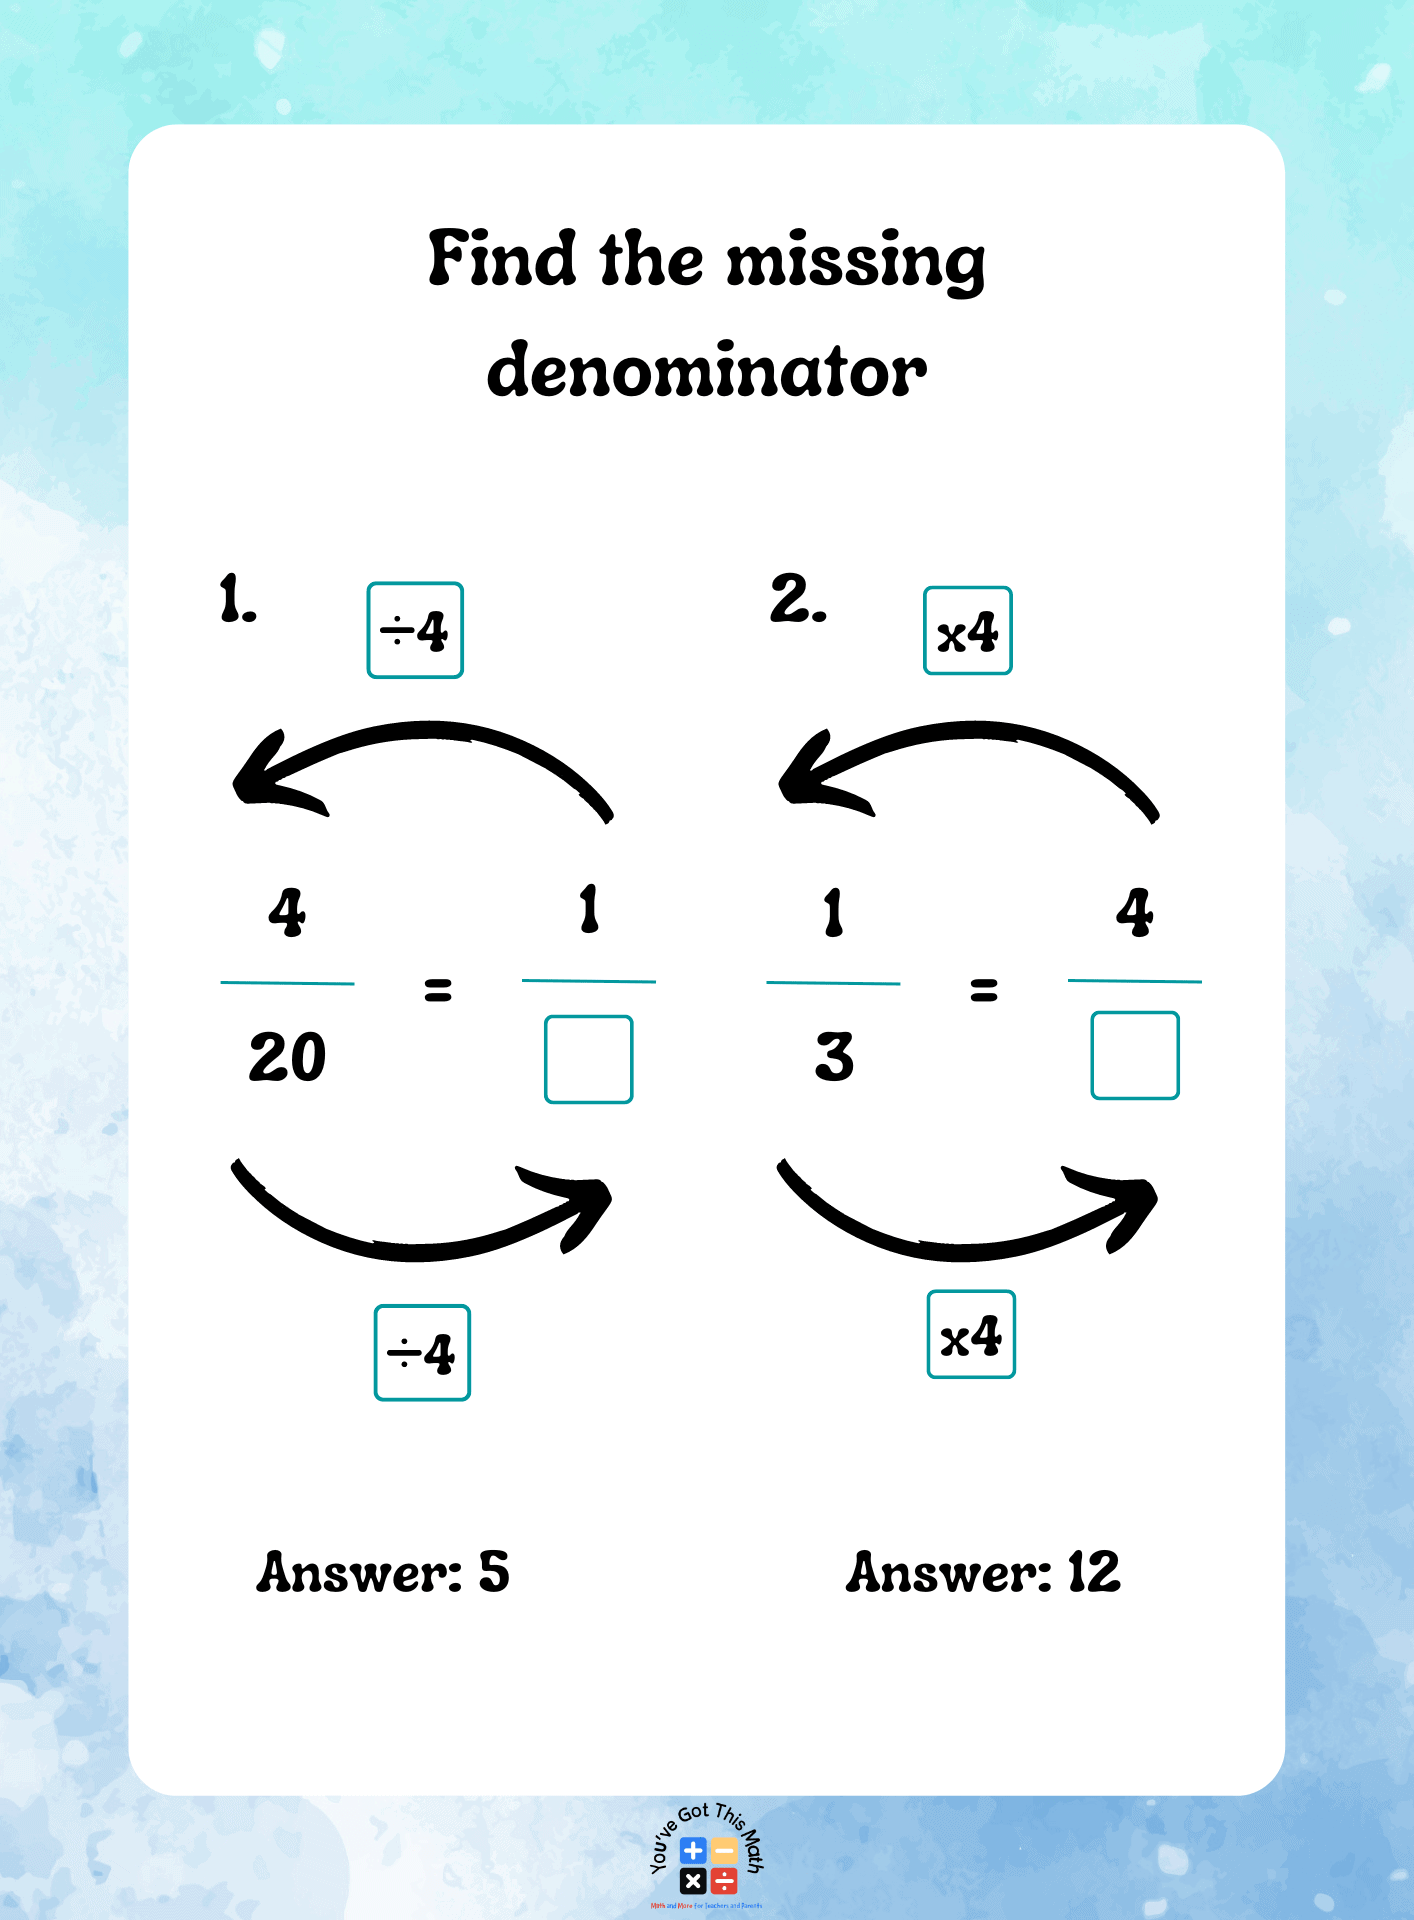 How to Find Missing Denominator of a Fraction